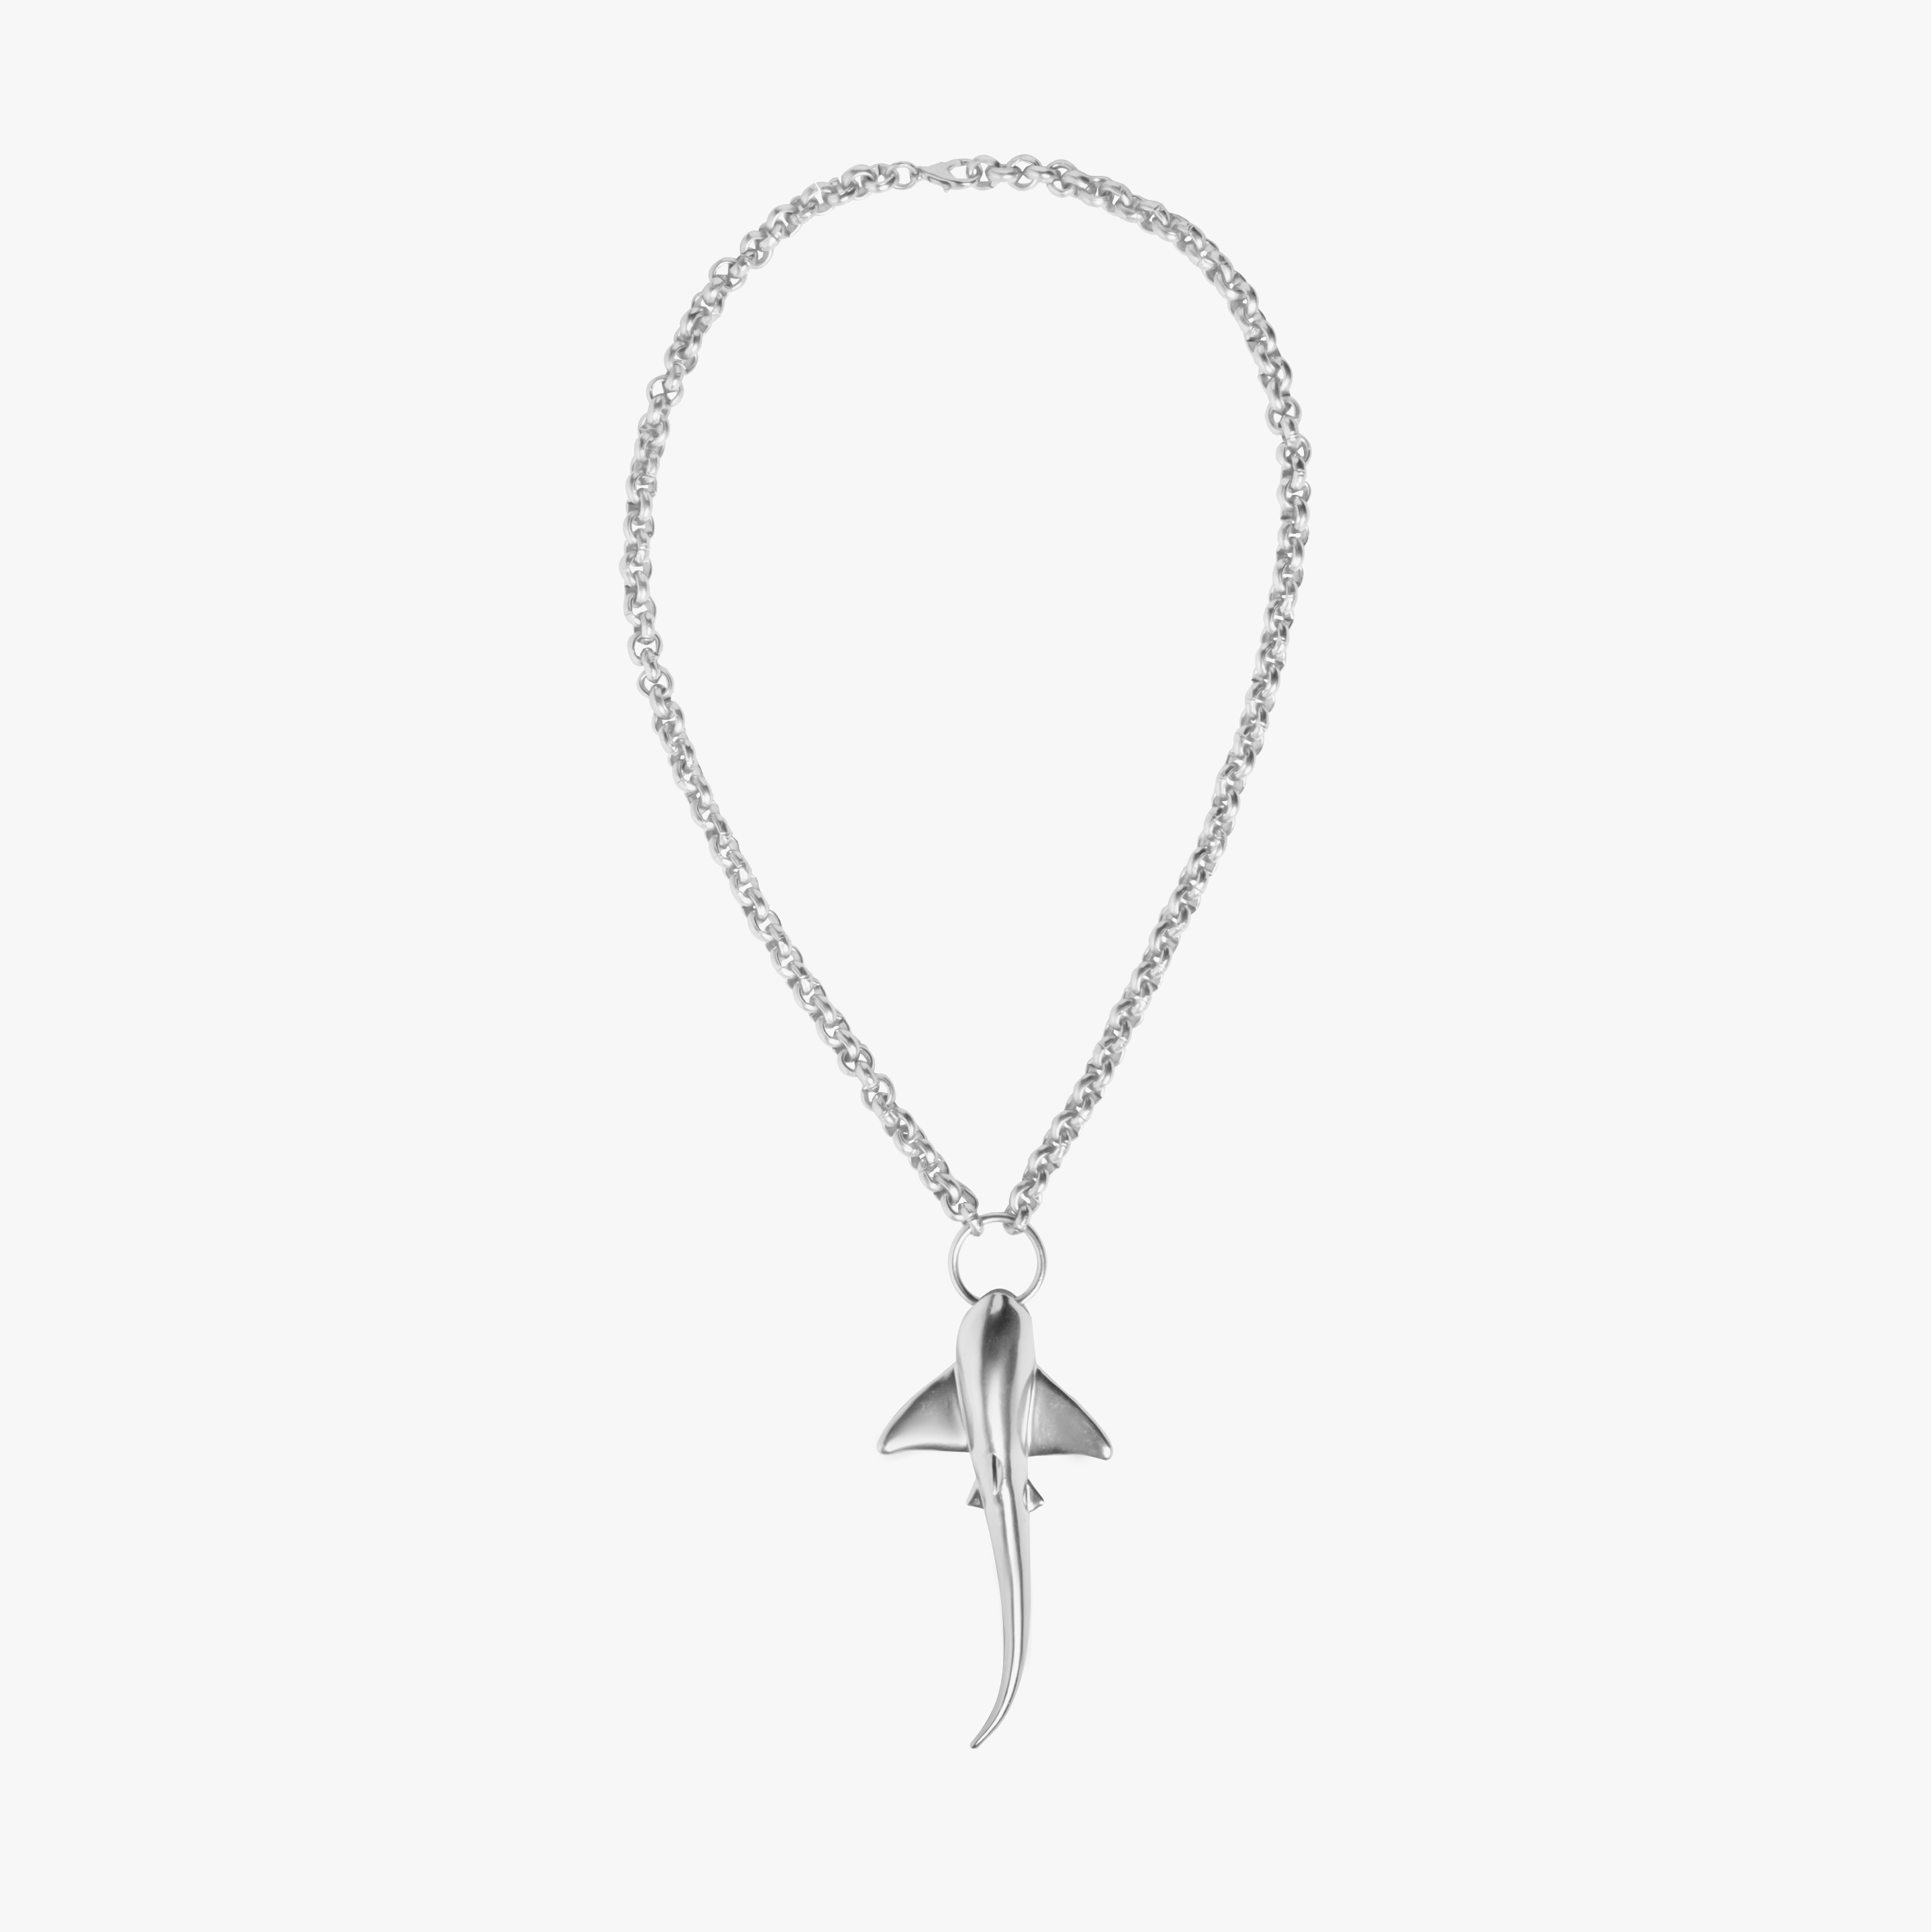 SHARK NECKLACE SILVER TONE , a product by Equiivalence